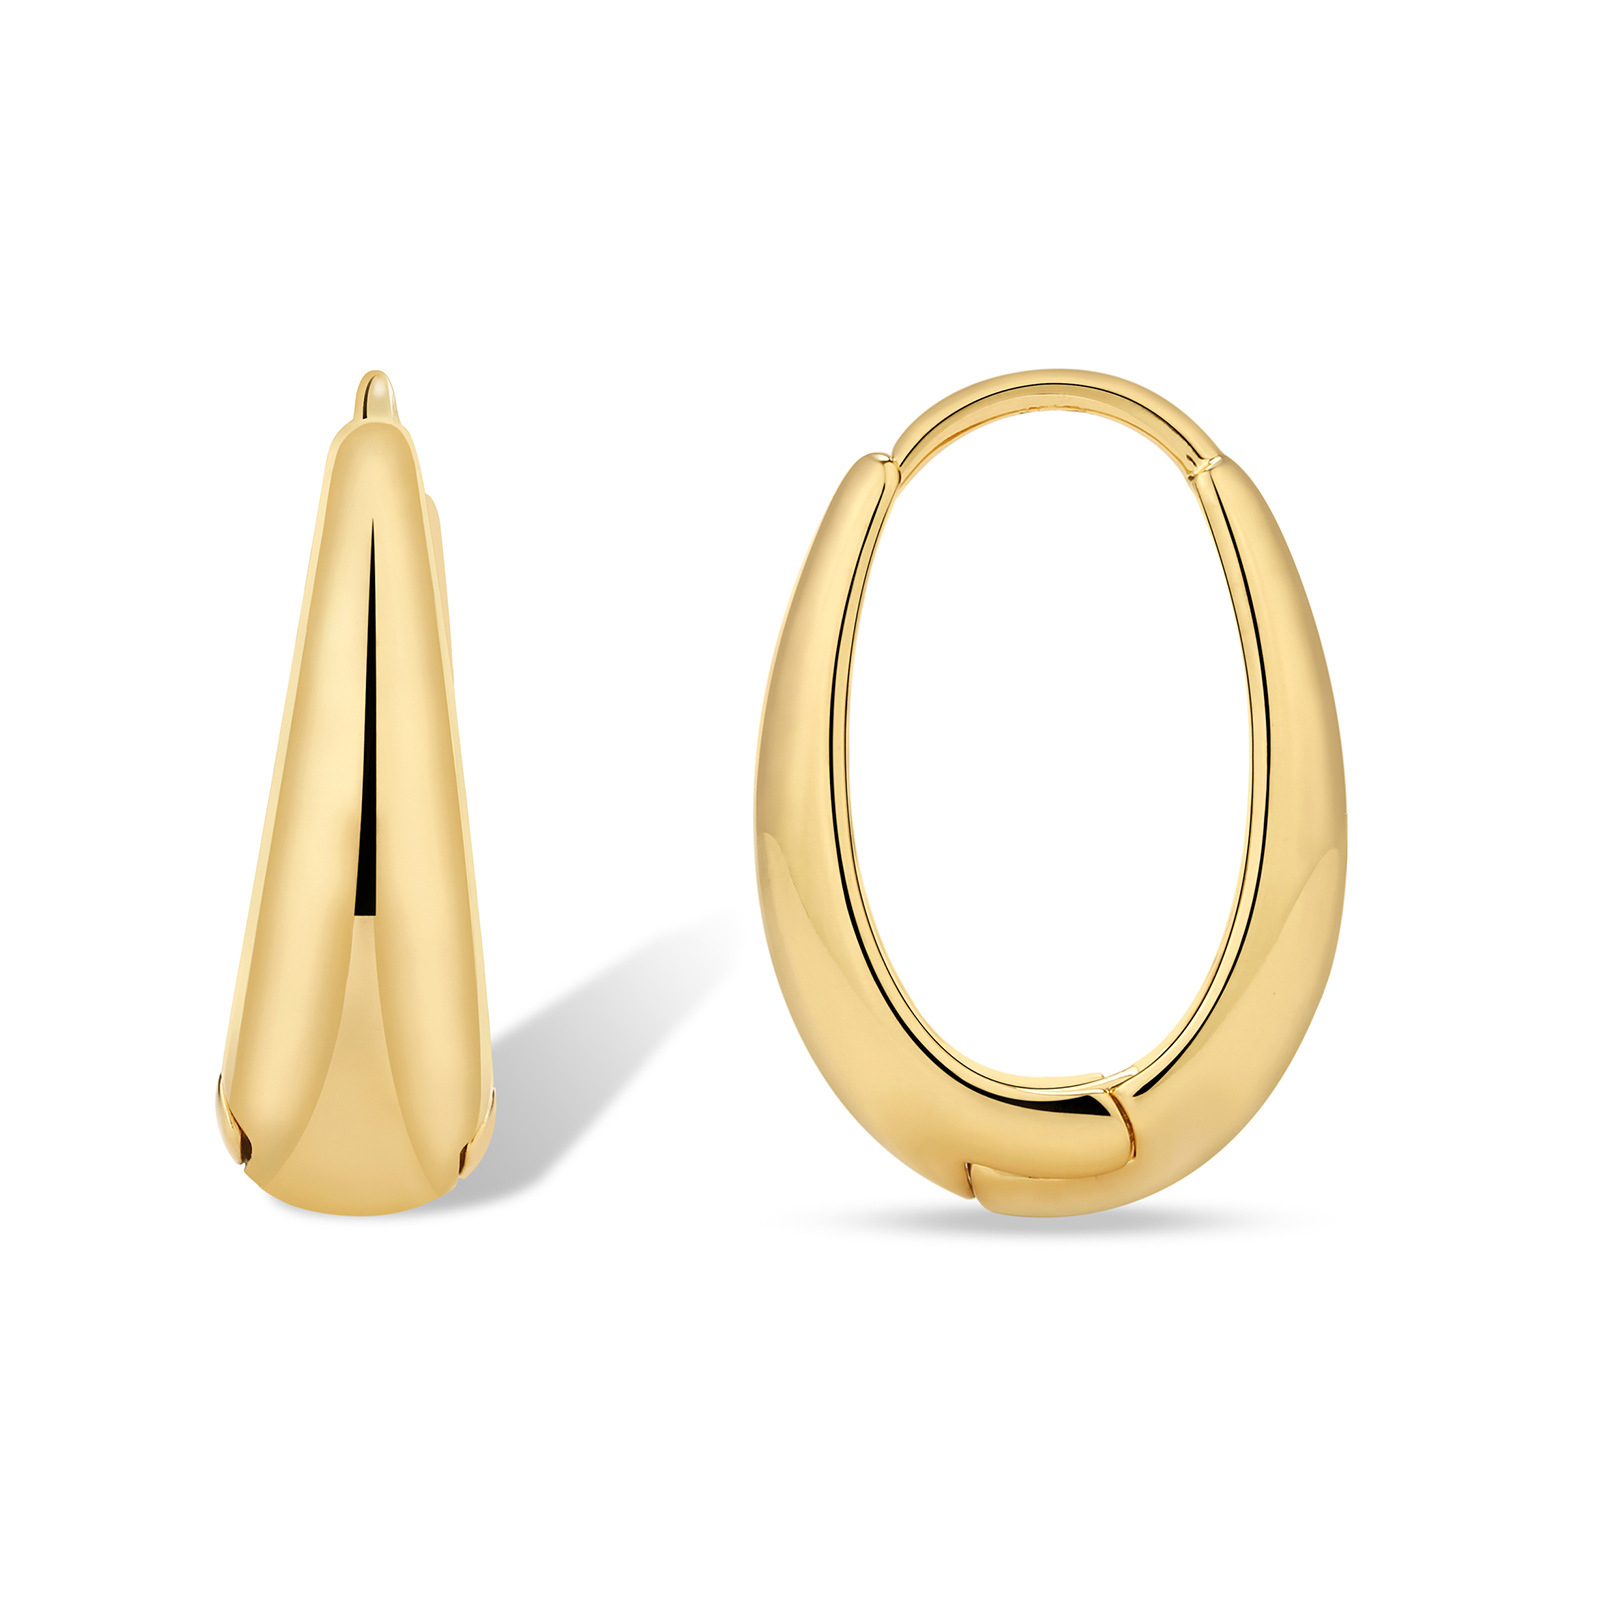 1:Oval gold